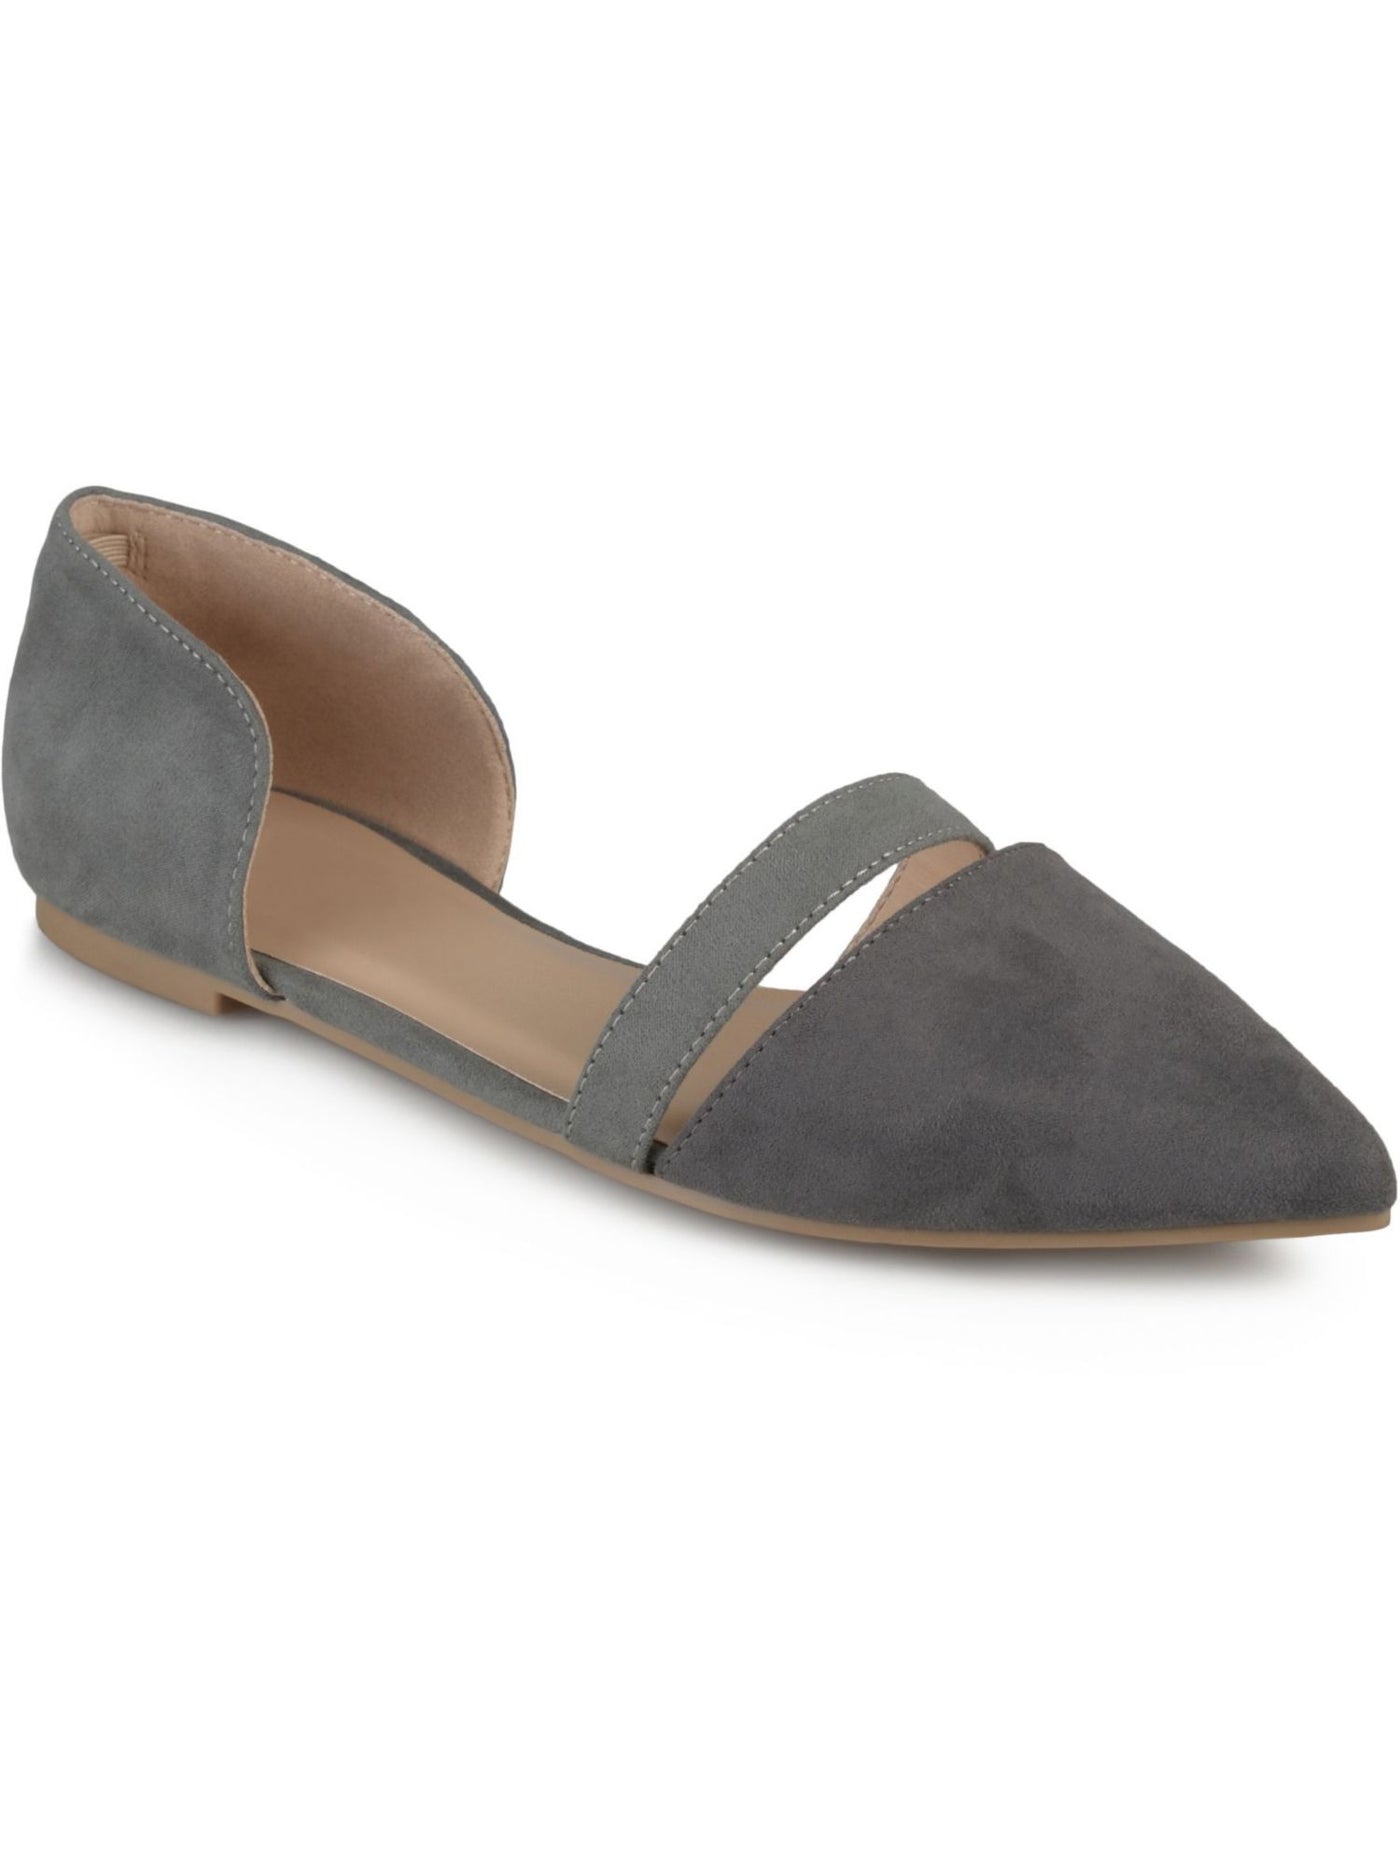 JOURNEE COLLECTION Womens Gray Dorsay Strap Accent Padded Nita Pointed Toe Slip On Ballet Flats 9 M